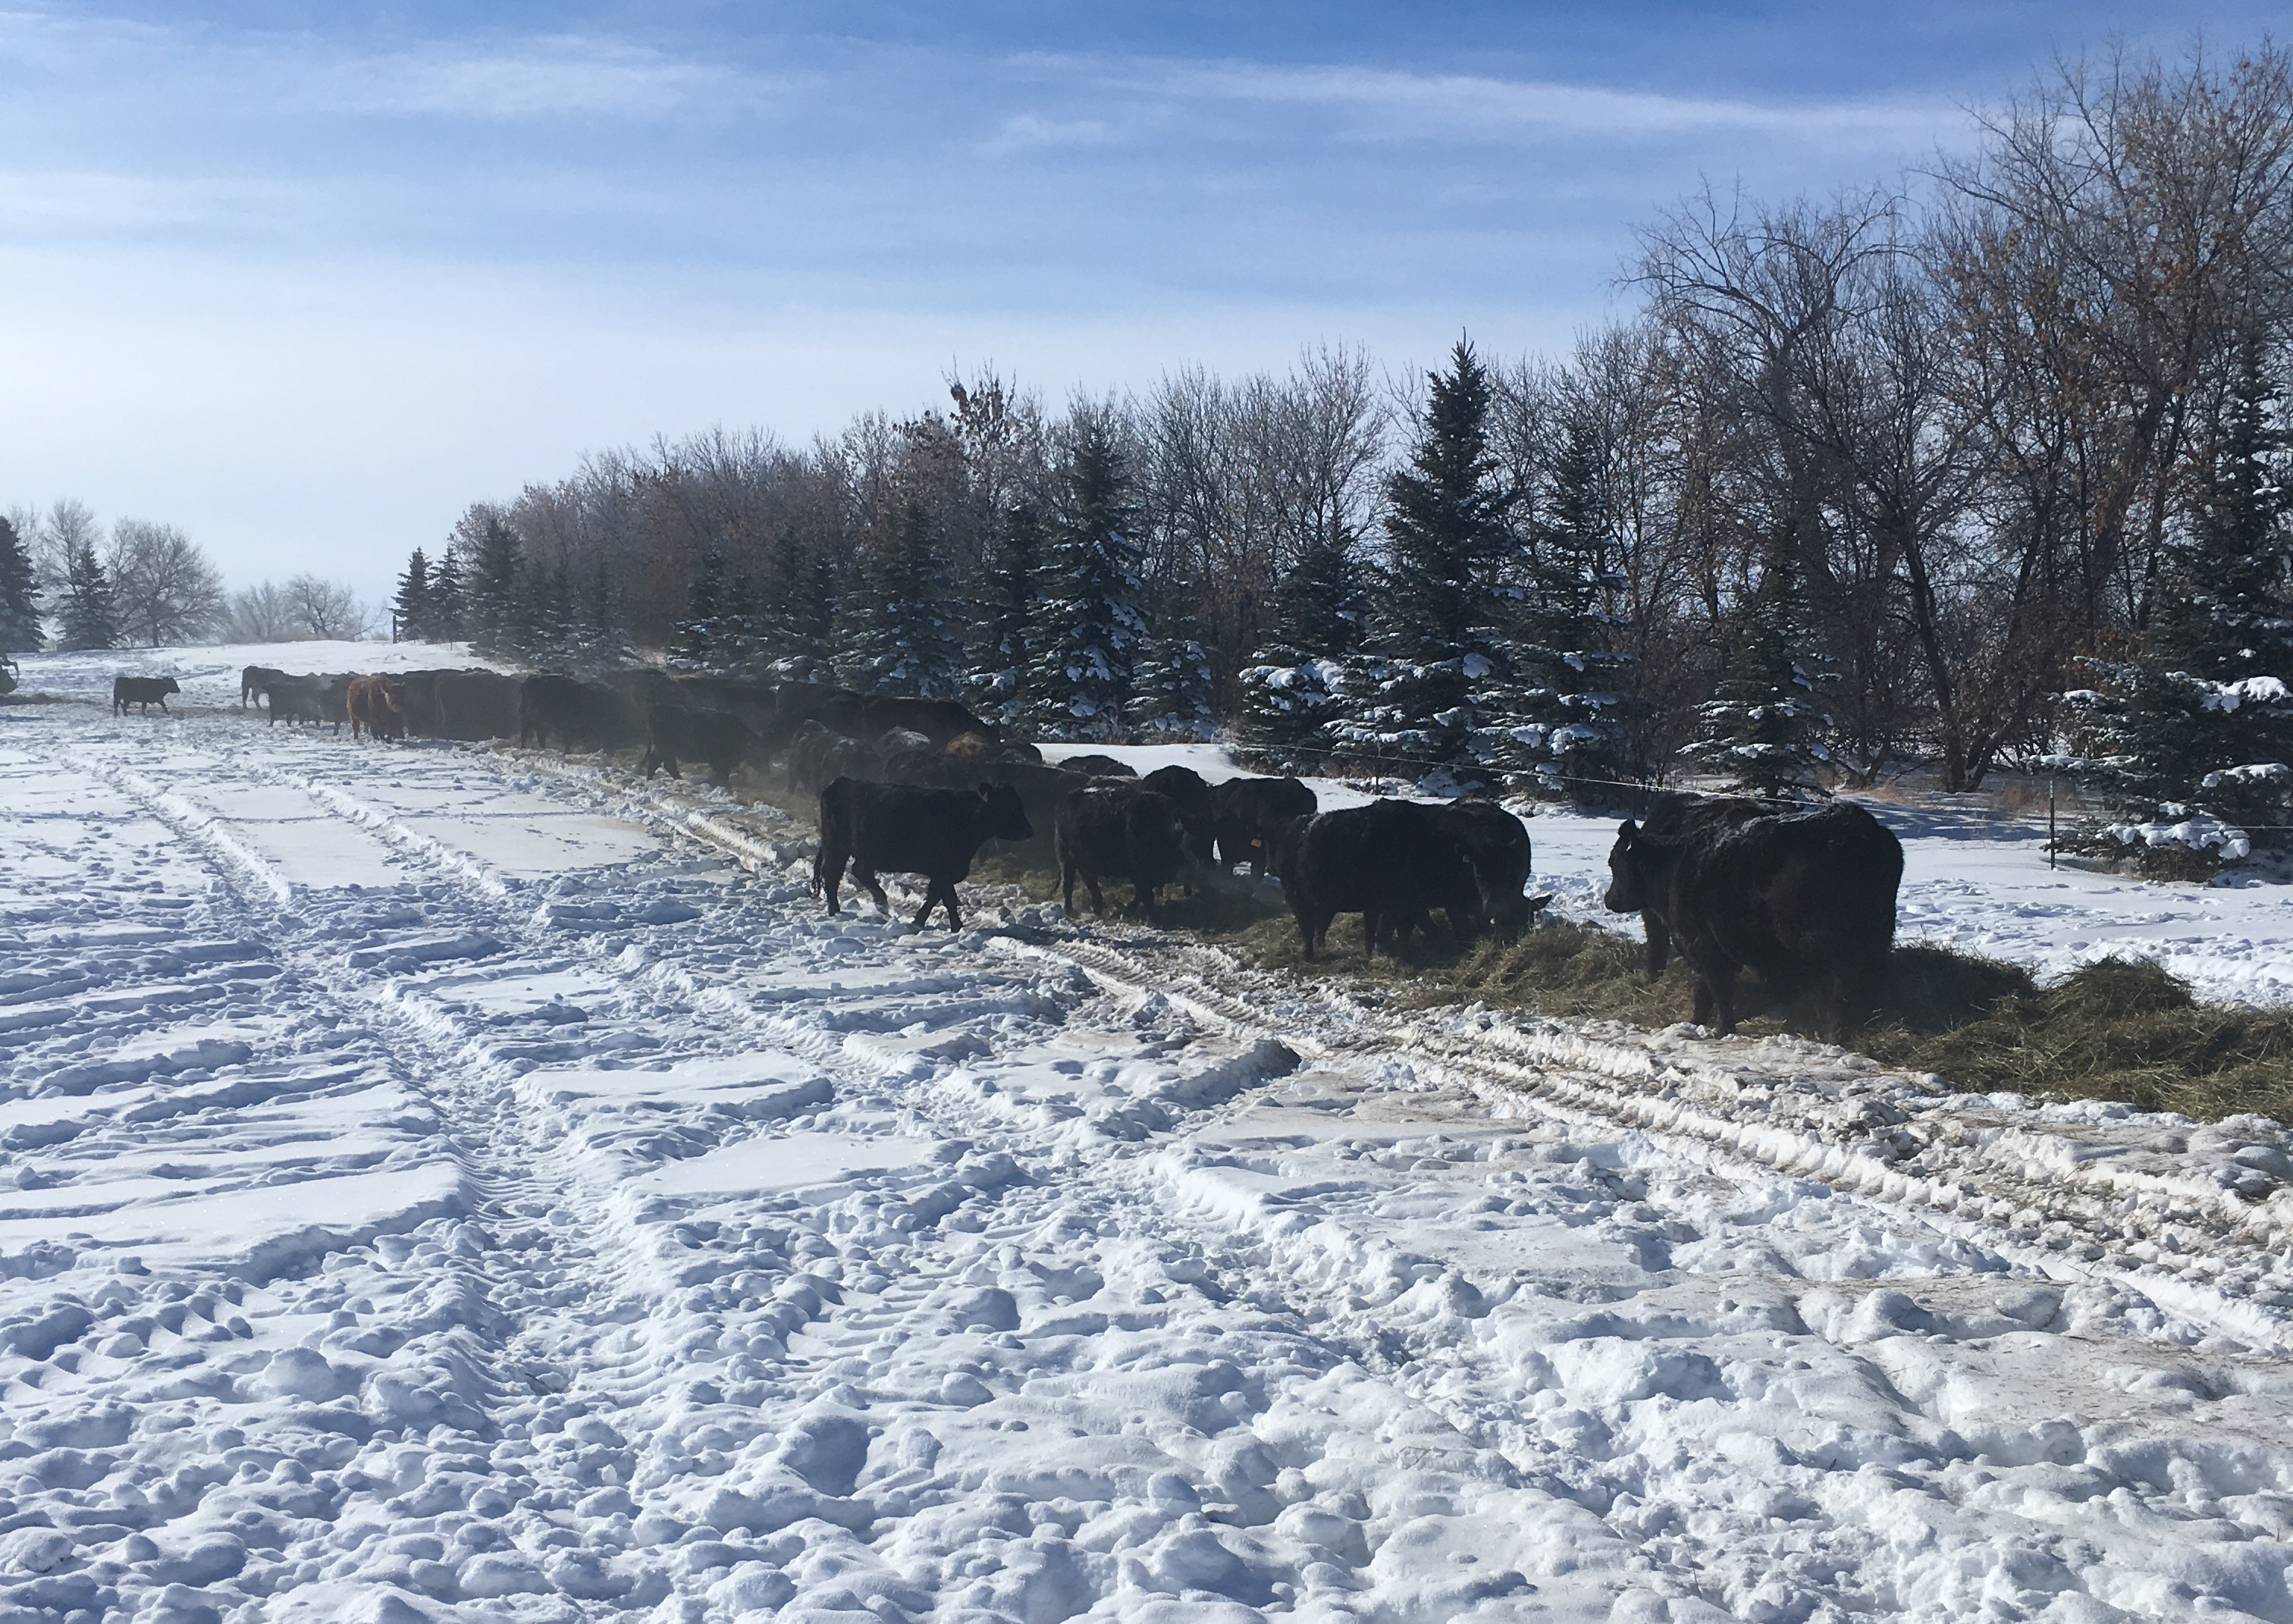 This winter's snowfall and frigid temperatures are forcing some livestock producers to use more feed than planned. (NDSU photo)